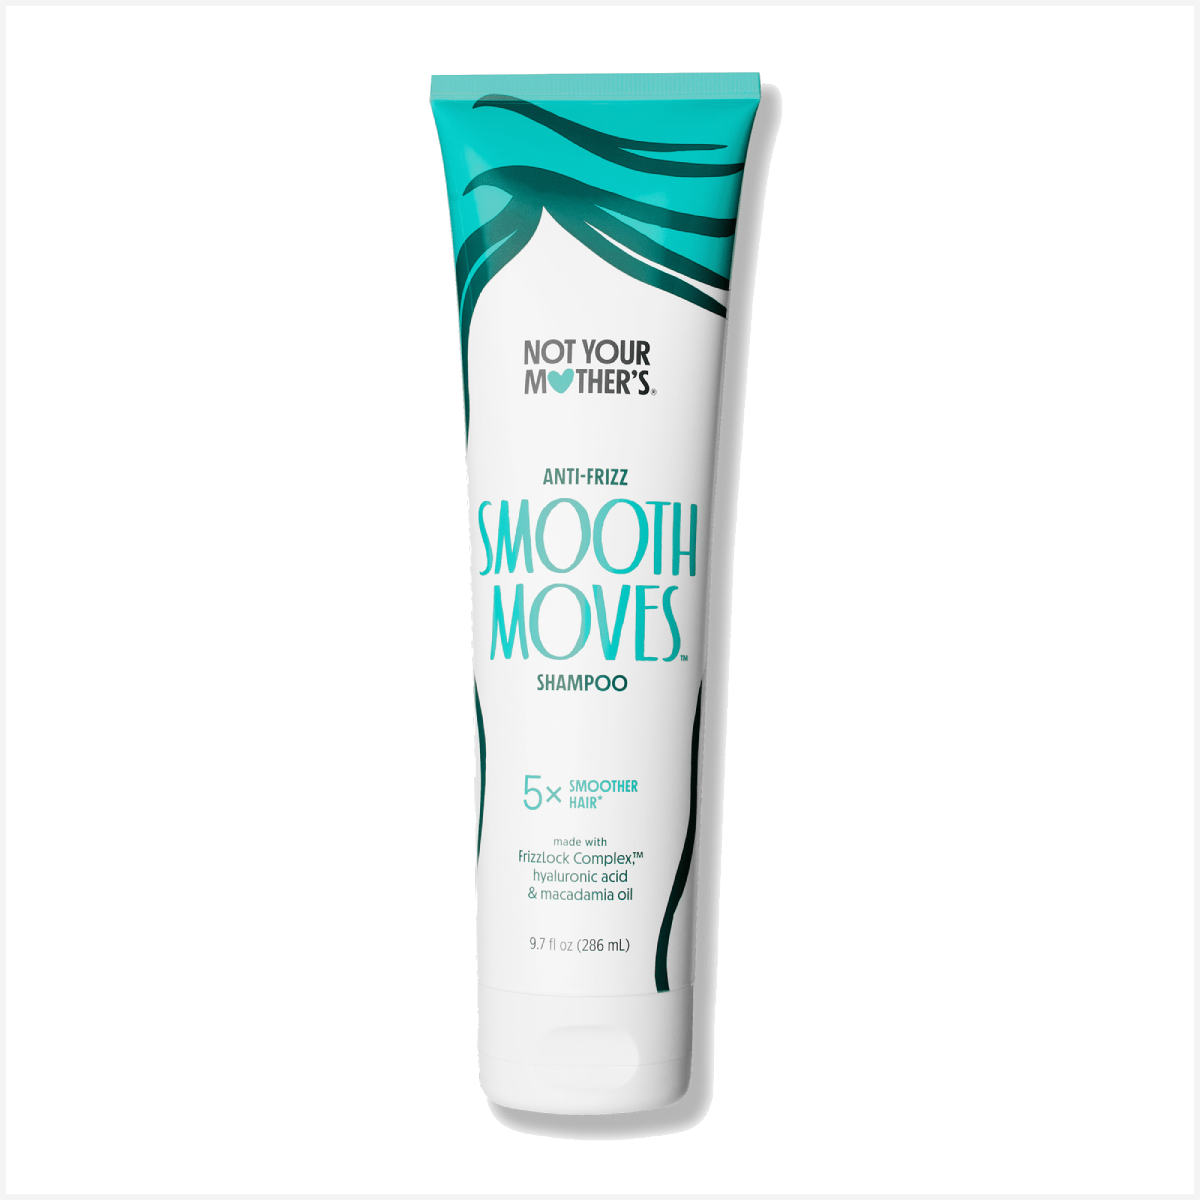 Shampoo Not Your Mother'S Smooth Moves 286ml - Shampoo